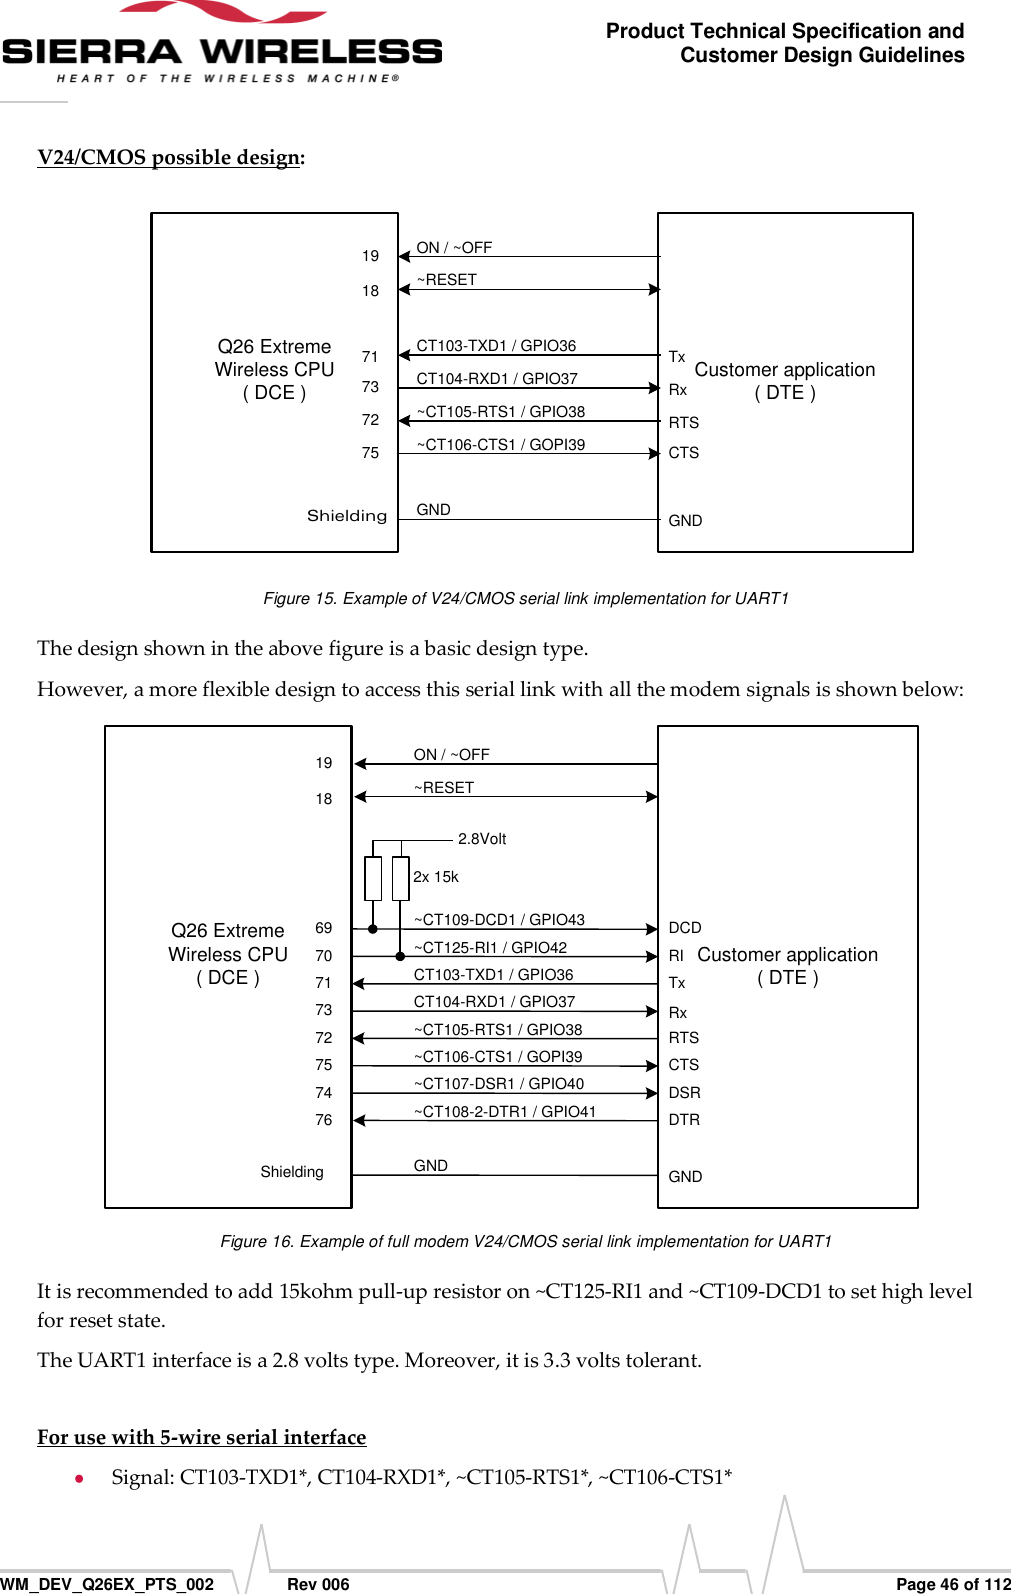      WM_DEV_Q26EX_PTS_002  Rev 006  Page 46 of 112 Product Technical Specification and Customer Design Guidelines V24/CMOS possible design: Customer application( DTE )Q26 Extreme Wireless CPU ( DCE )GND~RESETON / ~OFFCT103-TXD1 / GPIO36CT104-RXD1 / GPIO37~CT105-RTS1 / GPIO38~CT106-CTS1 / GOPI39197572731871ShieldingRxRTSCTSGNDTx Figure 15. Example of V24/CMOS serial link implementation for UART1 The design shown in the above figure is a basic design type.  However, a more flexible design to access this serial link with all the modem signals is shown below: Customer application( DTE )Q26 Extreme Wireless CPU( DCE )GND~RESETON / ~OFF~CT107-DSR1 / GPIO40~CT109-DCD1 / GPIO43~CT108-2-DTR1 / GPIO41~CT125-RI1 / GPIO42196976701874ShieldingDCDDTRRIGNDDSRCT103-TXD1 / GPIO36CT104-RXD1 / GPIO37~CT105-RTS1 / GPIO38~CT106-CTS1 / GOPI3975727371RxRTSCTSTx2x 15k2.8Volt Figure 16. Example of full modem V24/CMOS serial link implementation for UART1 It is recommended to add 15kohm pull-up resistor on ~CT125-RI1 and ~CT109-DCD1 to set high level for reset state. The UART1 interface is a 2.8 volts type. Moreover, it is 3.3 volts tolerant.  For use with 5-wire serial interface   Signal: CT103-TXD1*, CT104-RXD1*, ~CT105-RTS1*, ~CT106-CTS1* 